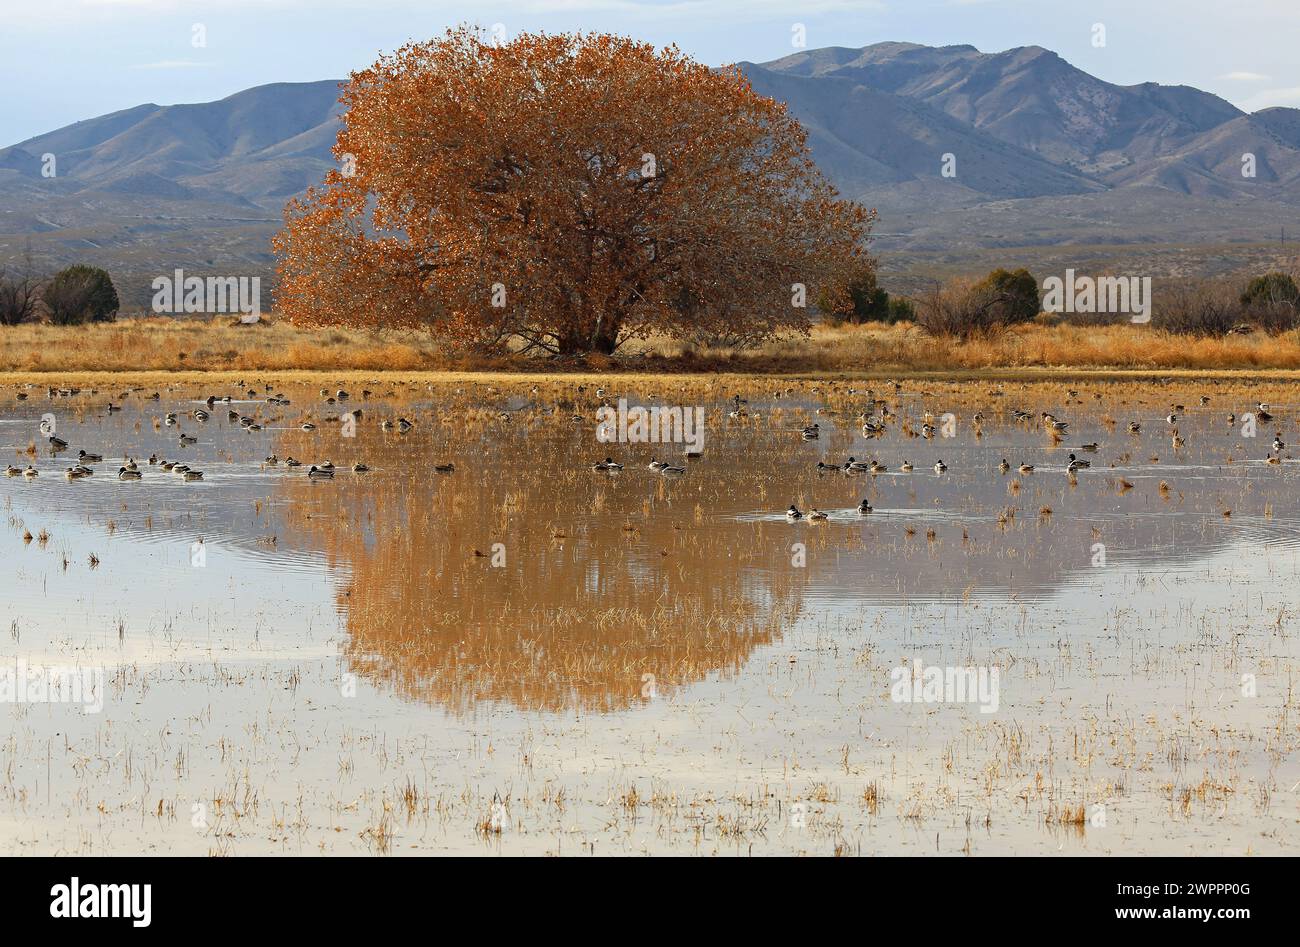 The tree and ducks - Bosque del Apache National Wildlife Refuge, New Mexico Stock Photo